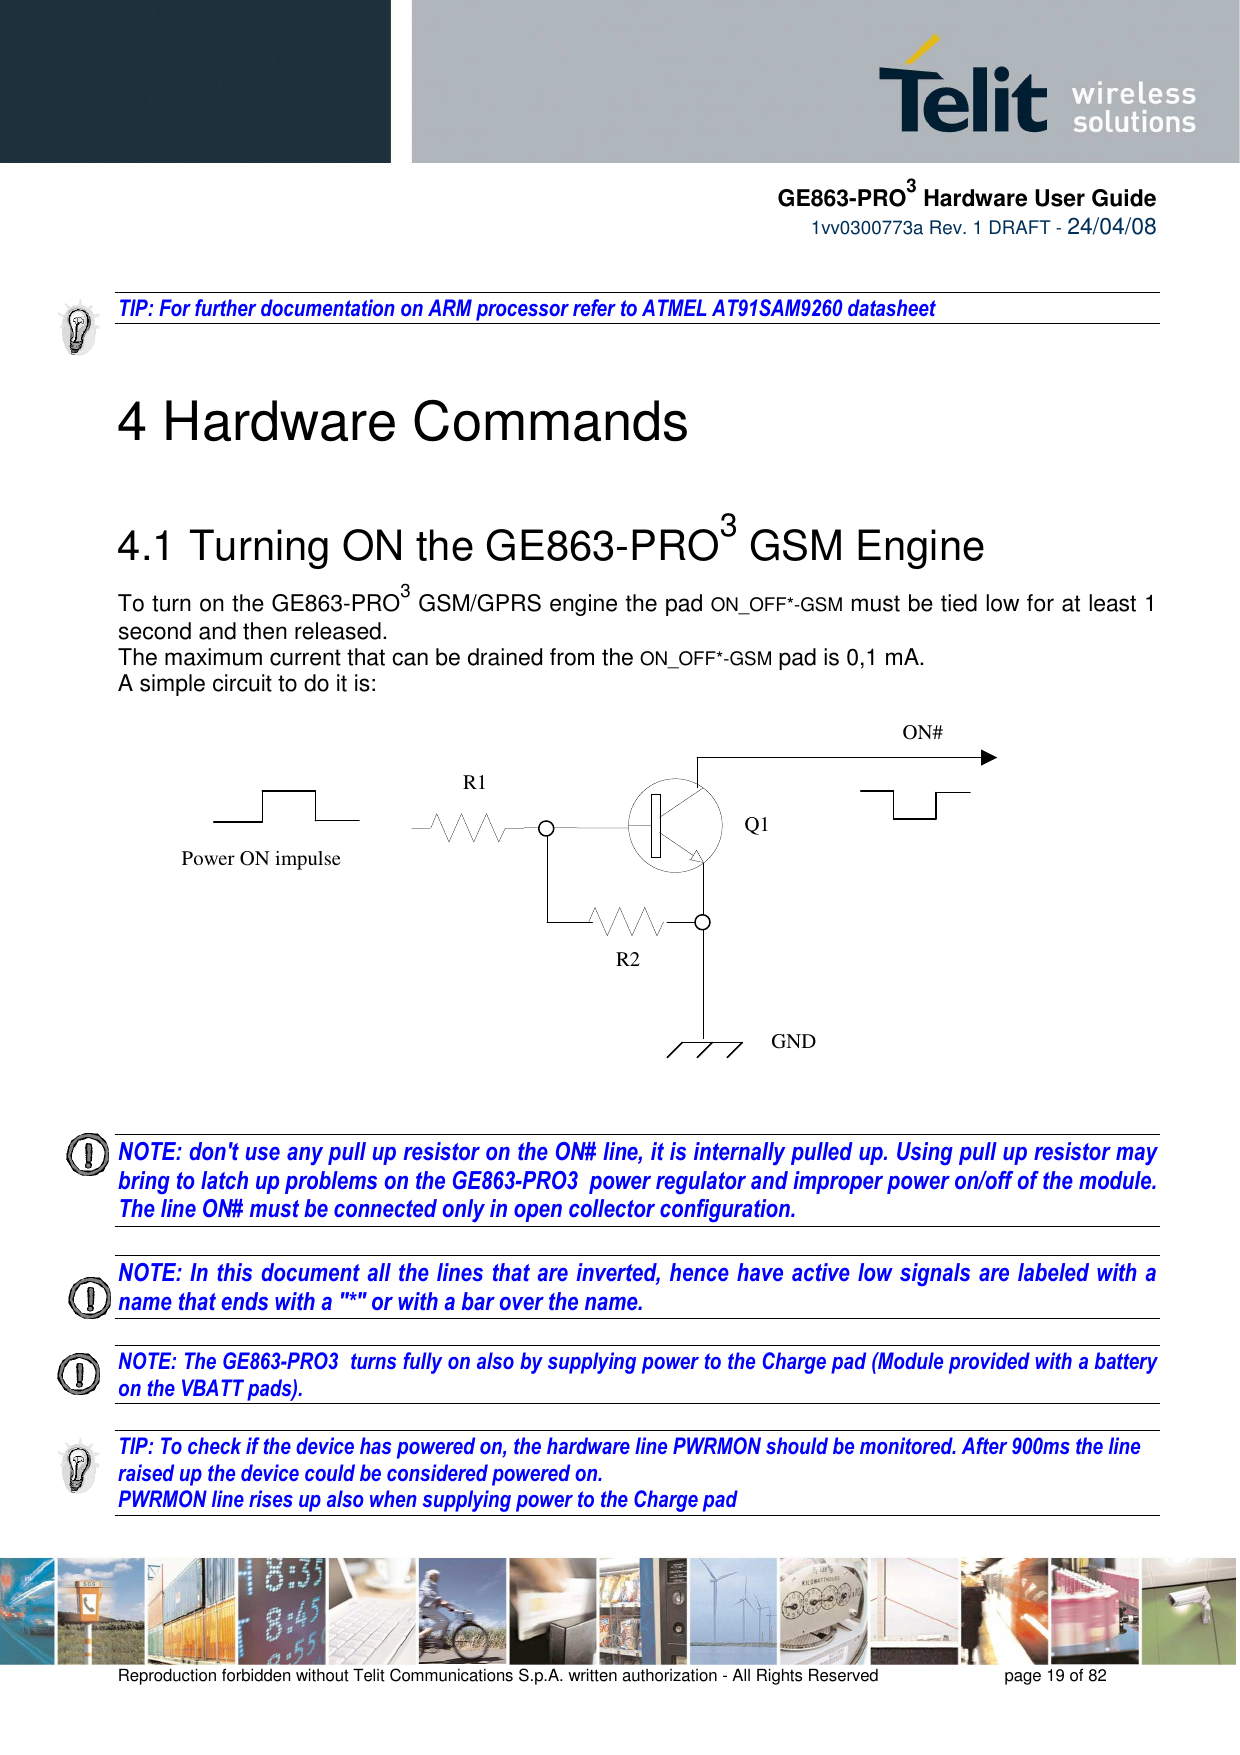     GE863-PRO3 Hardware User Guide  1vv0300773a Rev. 1 DRAFT - 24/04/08    Reproduction forbidden without Telit Communications S.p.A. written authorization - All Rights Reserved    page 19 of 82    TIP: For further documentation on ARM processor refer to ATMEL AT91SAM9260 datasheet   4 Hardware Commands 4.1  Turning ON the GE863-PRO3 GSM Engine To turn on the GE863-PRO3 GSM/GPRS engine the pad ON_OFF*-GSM must be tied low for at least 1 second and then released. The maximum current that can be drained from the ON_OFF*-GSM pad is 0,1 mA. A simple circuit to do it is:   NOTE: don&apos;t use any pull up resistor on the ON# line, it is internally pulled up. Using pull up resistor may bring to latch up problems on the GE863-PRO3  power regulator and improper power on/off of the module. The line ON# must be connected only in open collector configuration.  NOTE: In this document all the lines that are inverted, hence have active low signals are labeled with a name that ends with a &quot;*&quot; or with a bar over the name.  NOTE: The GE863-PRO3  turns fully on also by supplying power to the Charge pad (Module provided with a battery on the VBATT pads).  TIP: To check if the device has powered on, the hardware line PWRMON should be monitored. After 900ms the line raised up the device could be considered powered on. PWRMON line rises up also when supplying power to the Charge pad    ON#Power ON impulse  GNDR1R2Q1